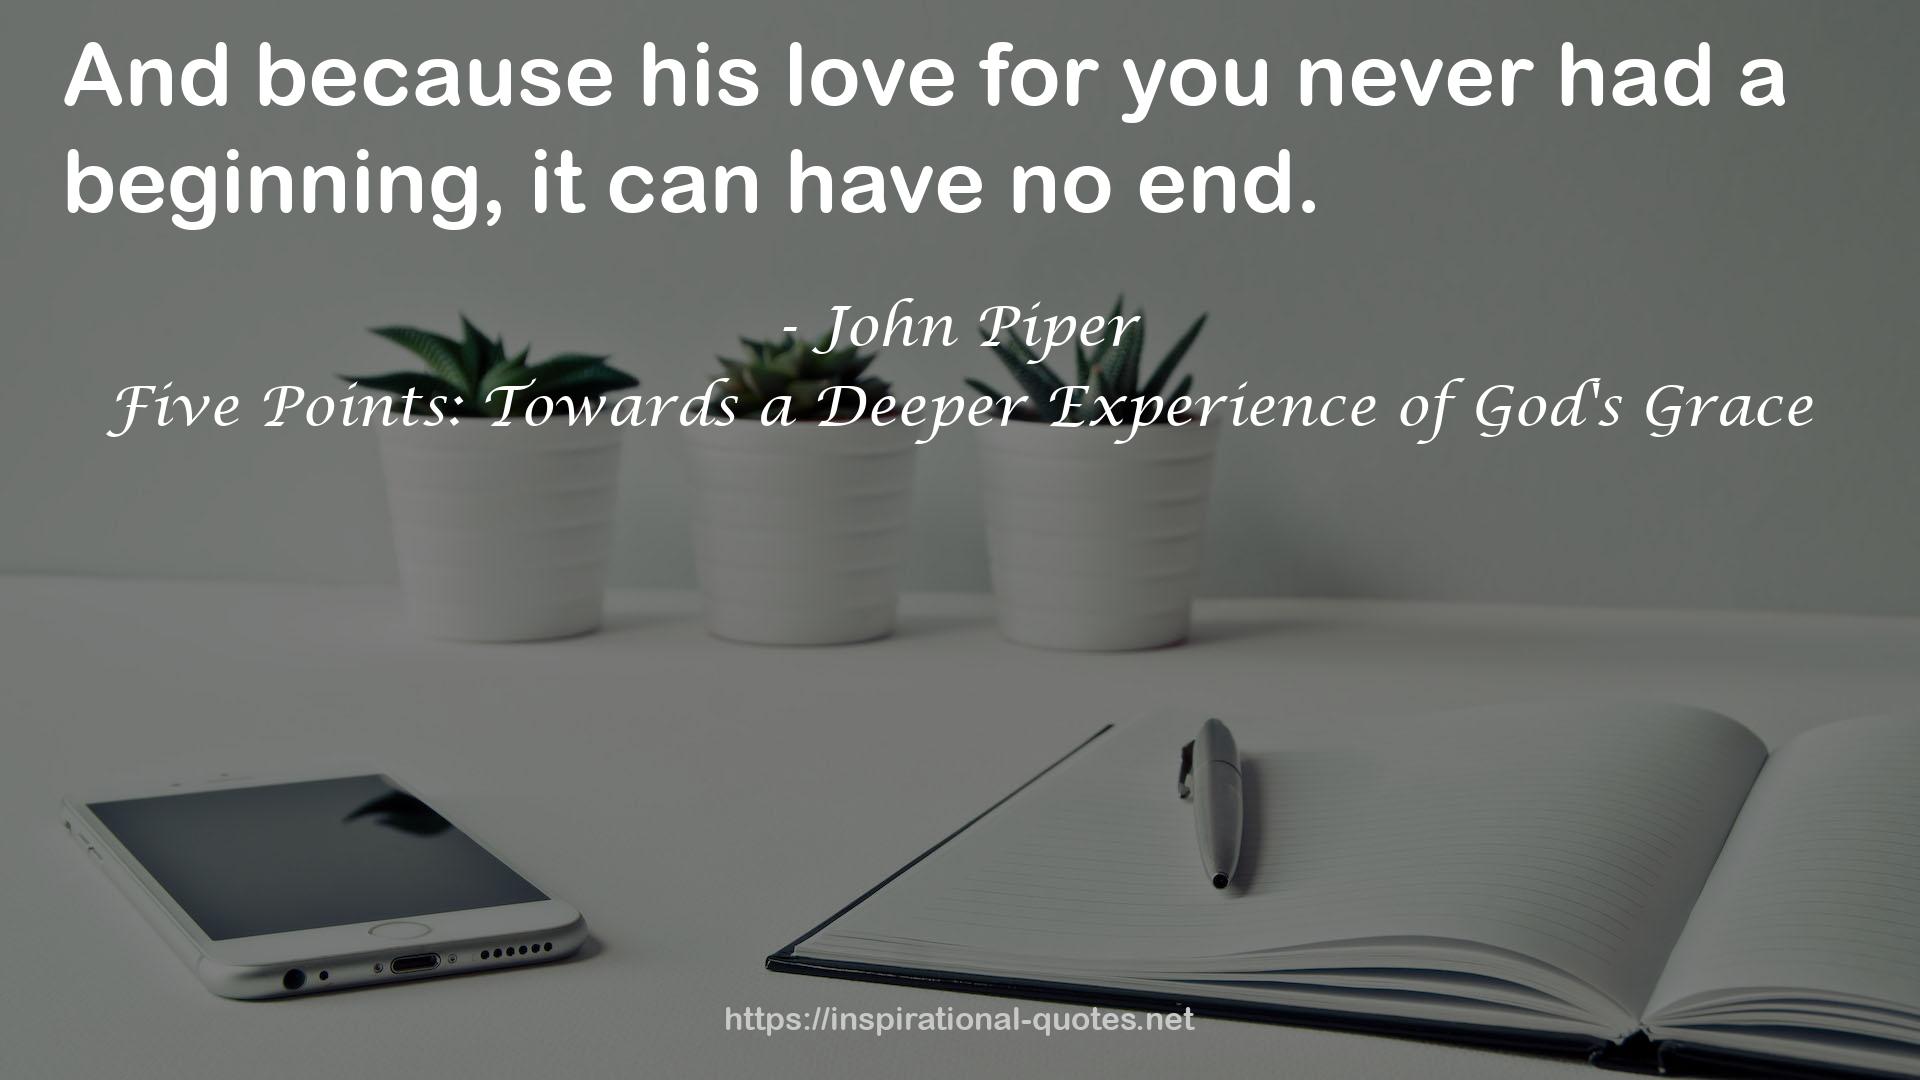 Five Points: Towards a Deeper Experience of God's Grace QUOTES